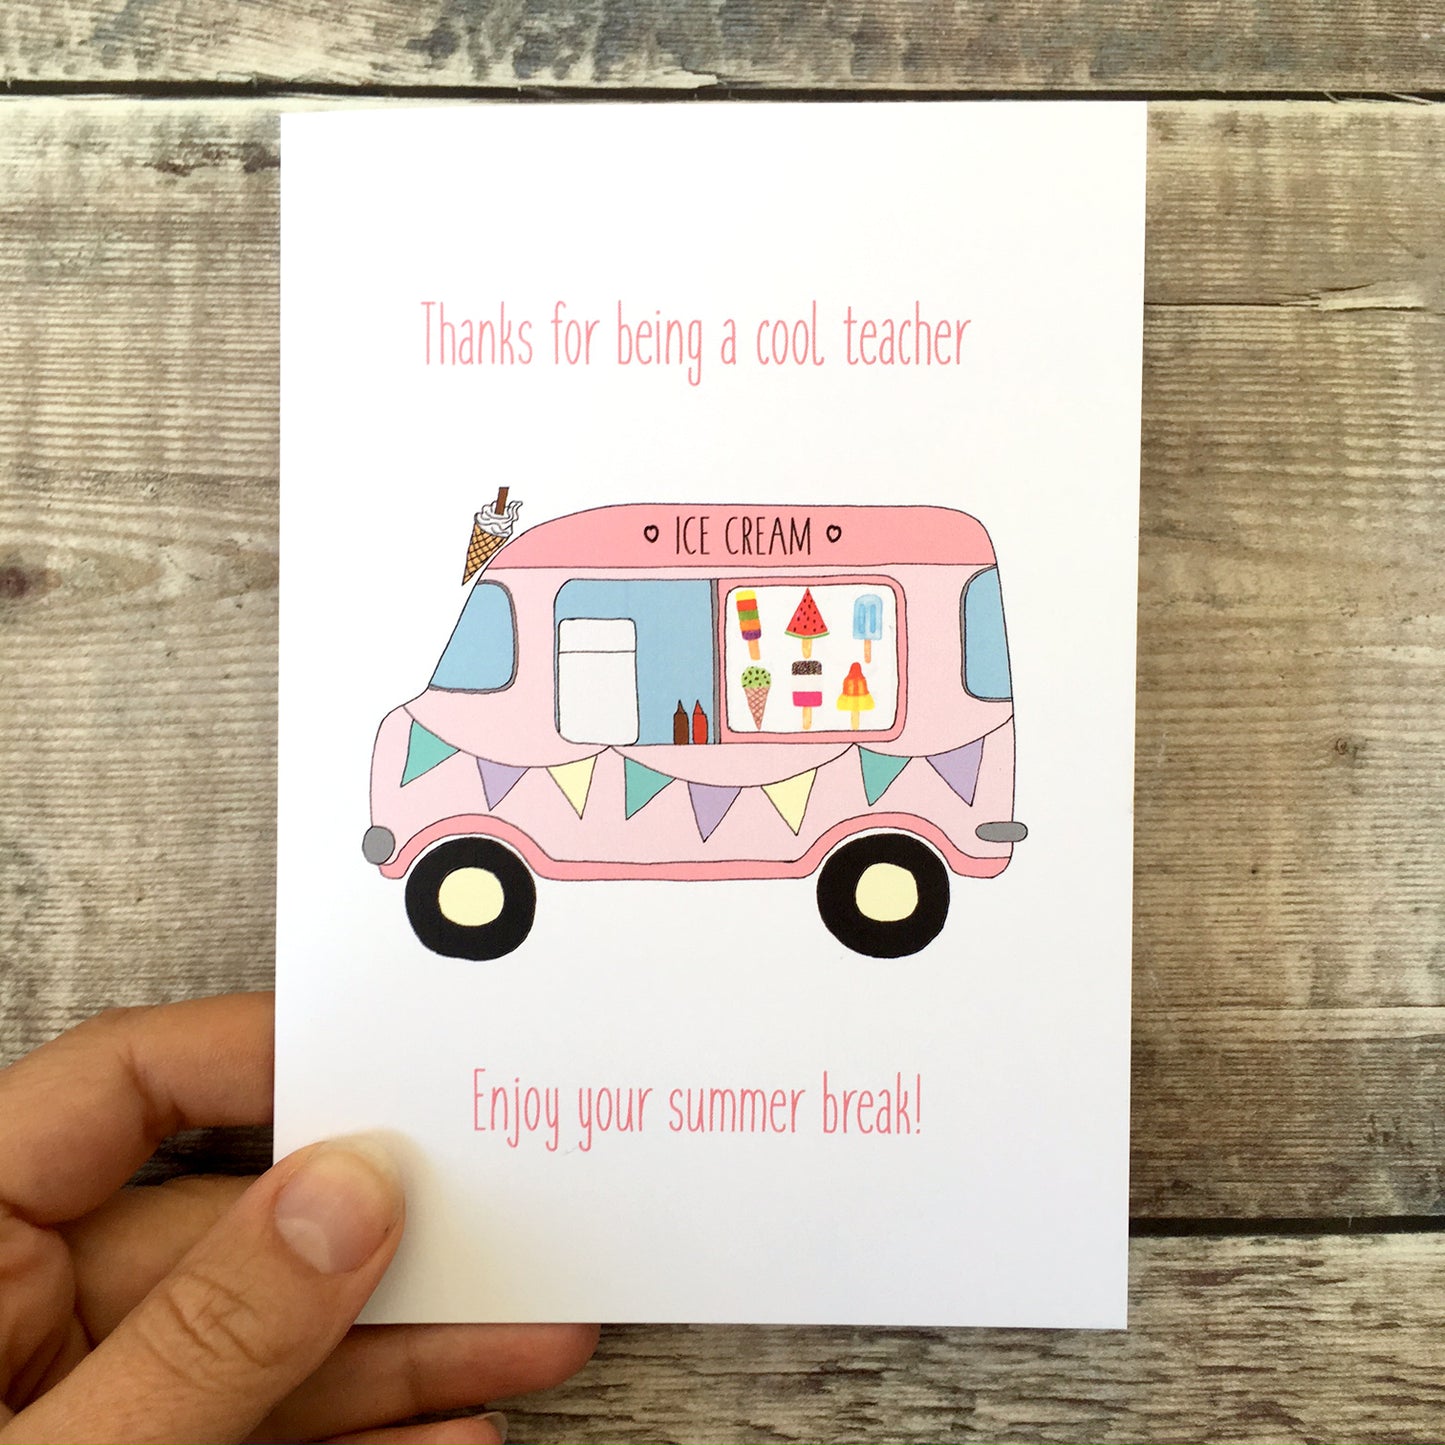 Cool teacher card - Thank you card for teaching staff - End of term gift